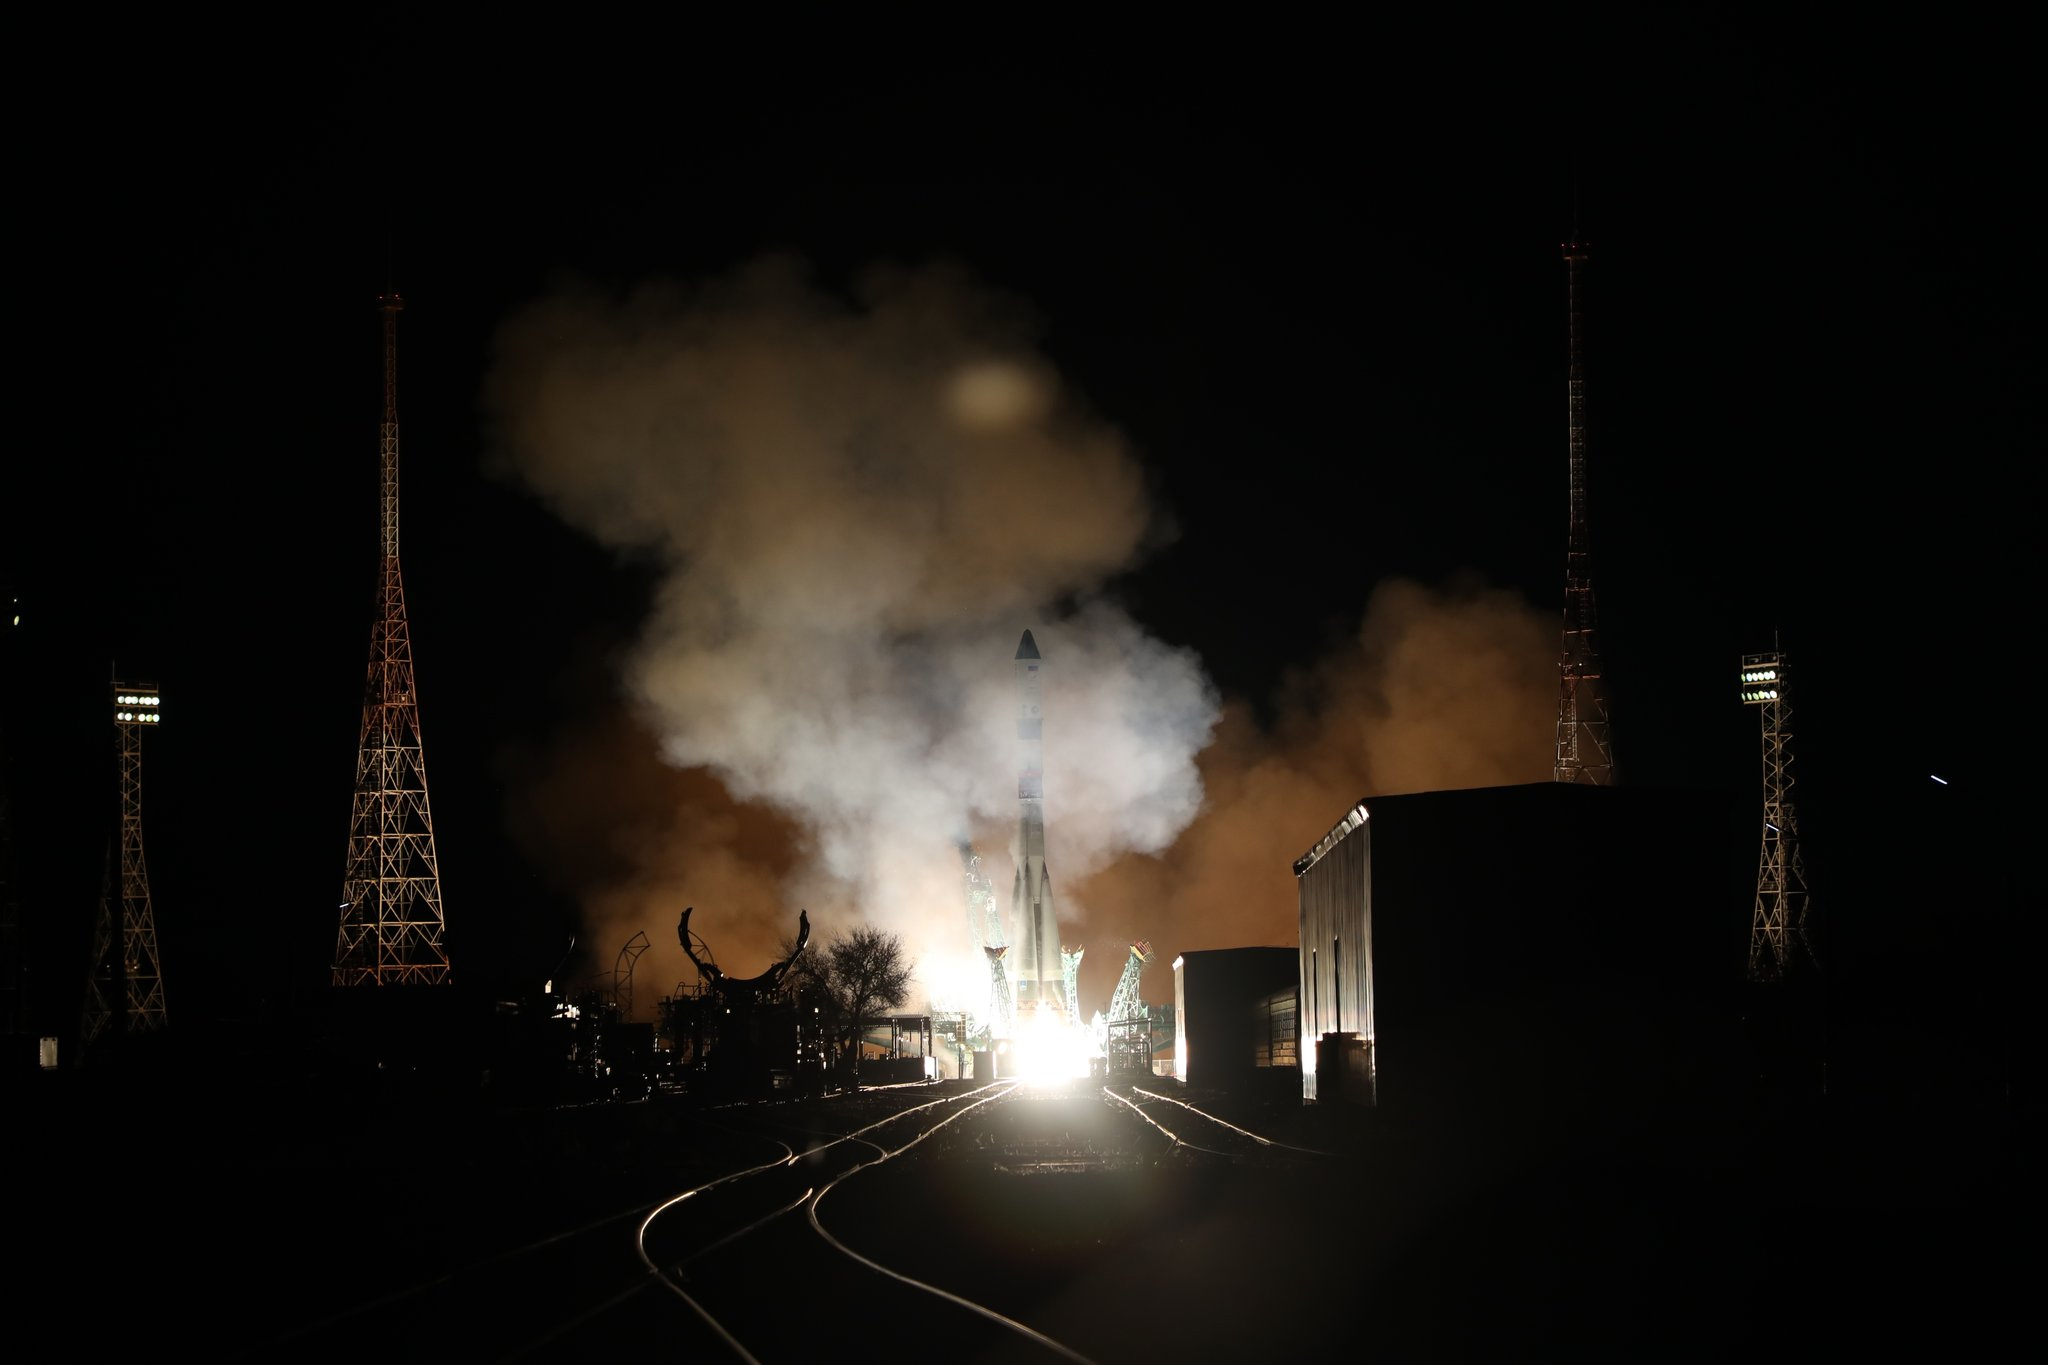 A Russian Soyuz 2.1a rocket carrying the uncrewed Progress 79 cargo ship launches into orbit from Baikonur Cosmodrome, Kazakhstan in the pre-dawn hours of Oct. 28, 2021 (late Oct. 27 EDT).